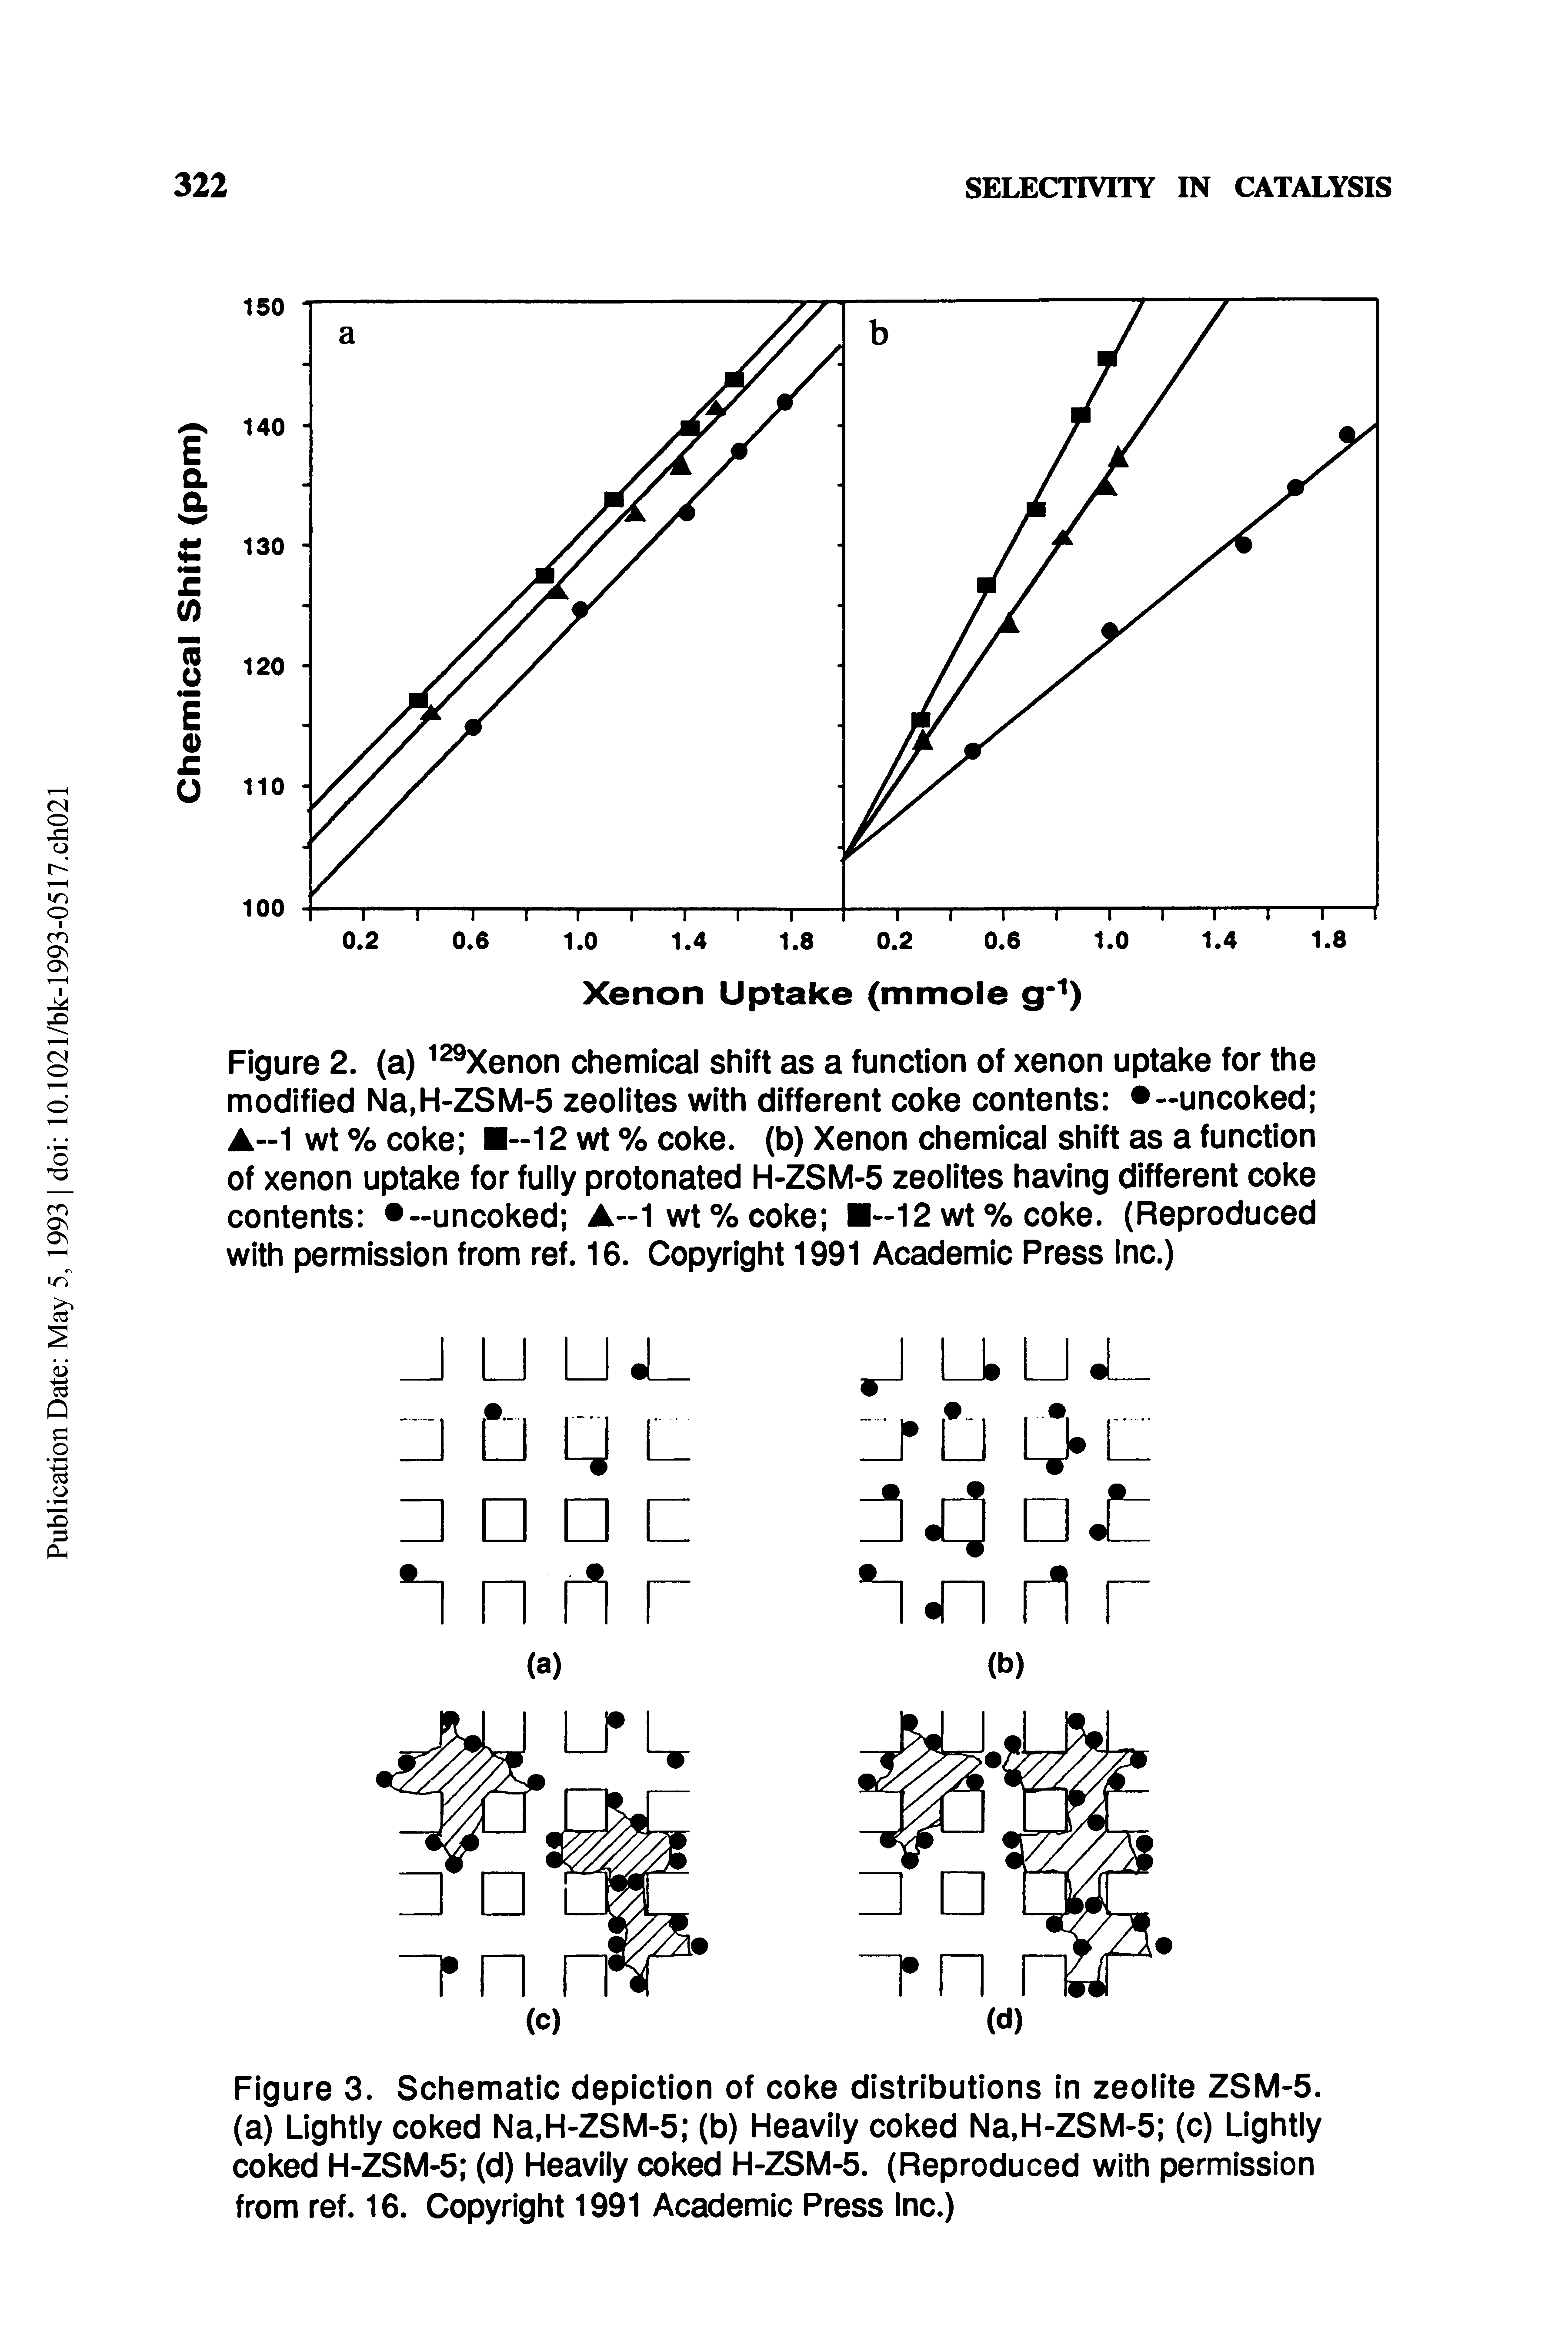 Figure 3. Schematic depiction of coke distributions in zeolite ZSM-5. (a) Lightly coked Na,H-ZSM-5 (b) Heavily coked Na,H-ZSM-5 (c) Lightly coked H-ZSM-5 (d) Heavily coked H-ZSM-5. (Reproduced with permission from ref. 16. Copyright 1991 Academic Press Inc.)...